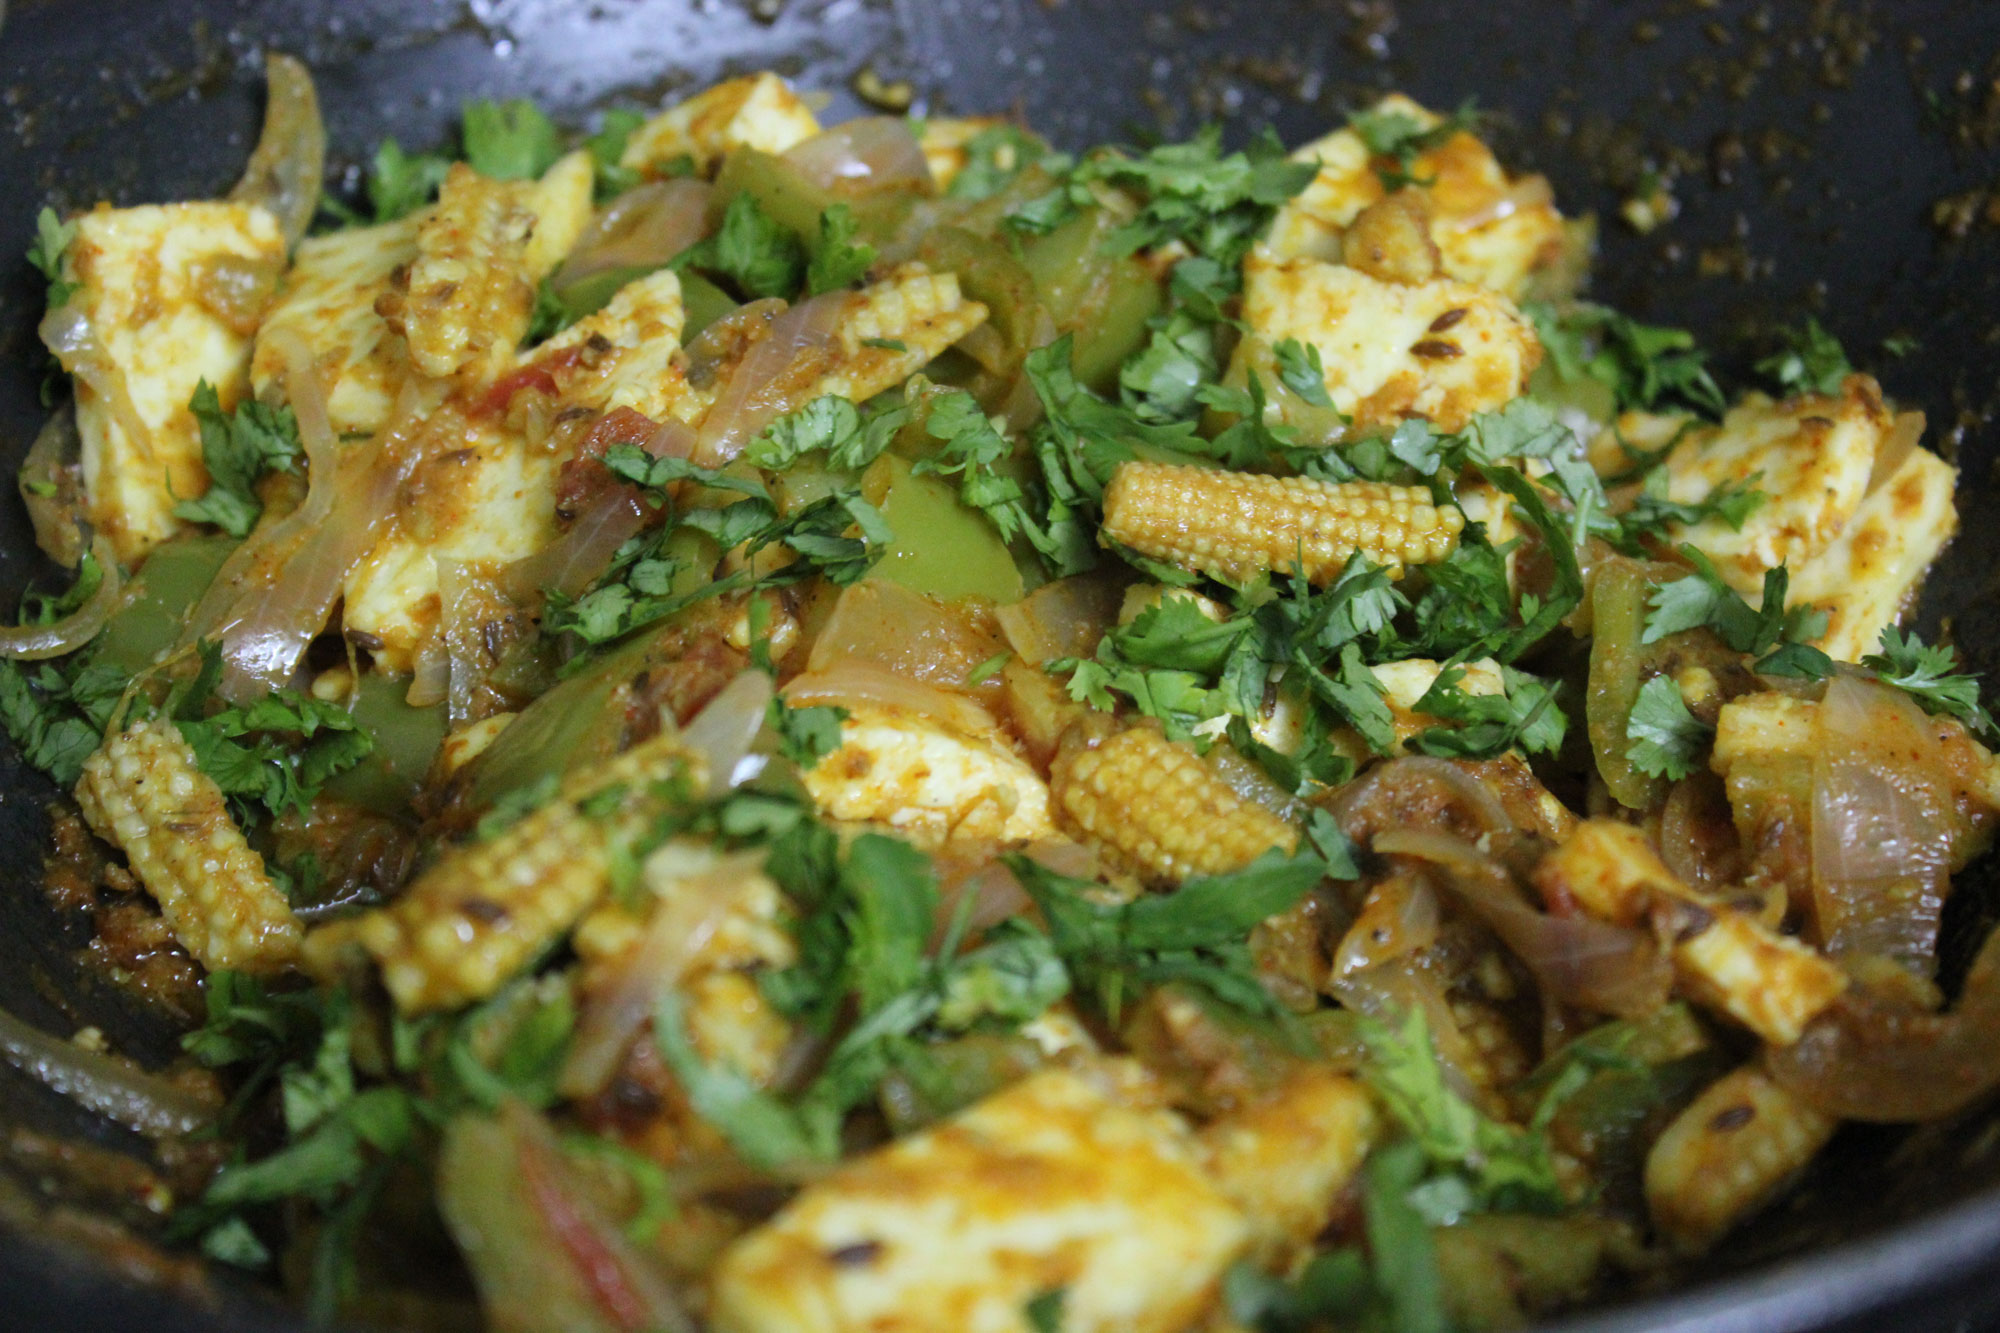 Photograph of an Indian dish with paneer (a type of cheese) and baby corn.